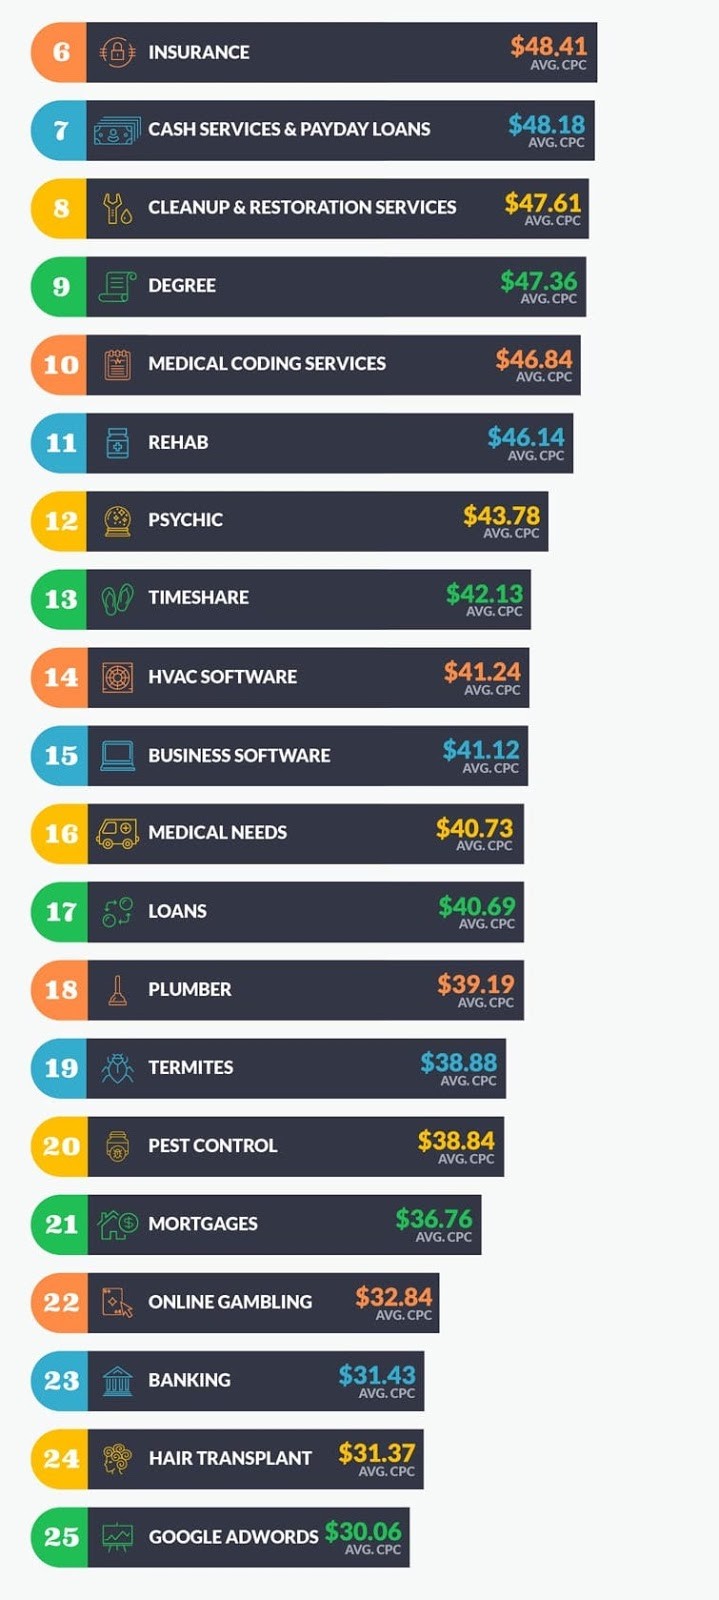 google adwords top 25 most expensive keywords_3